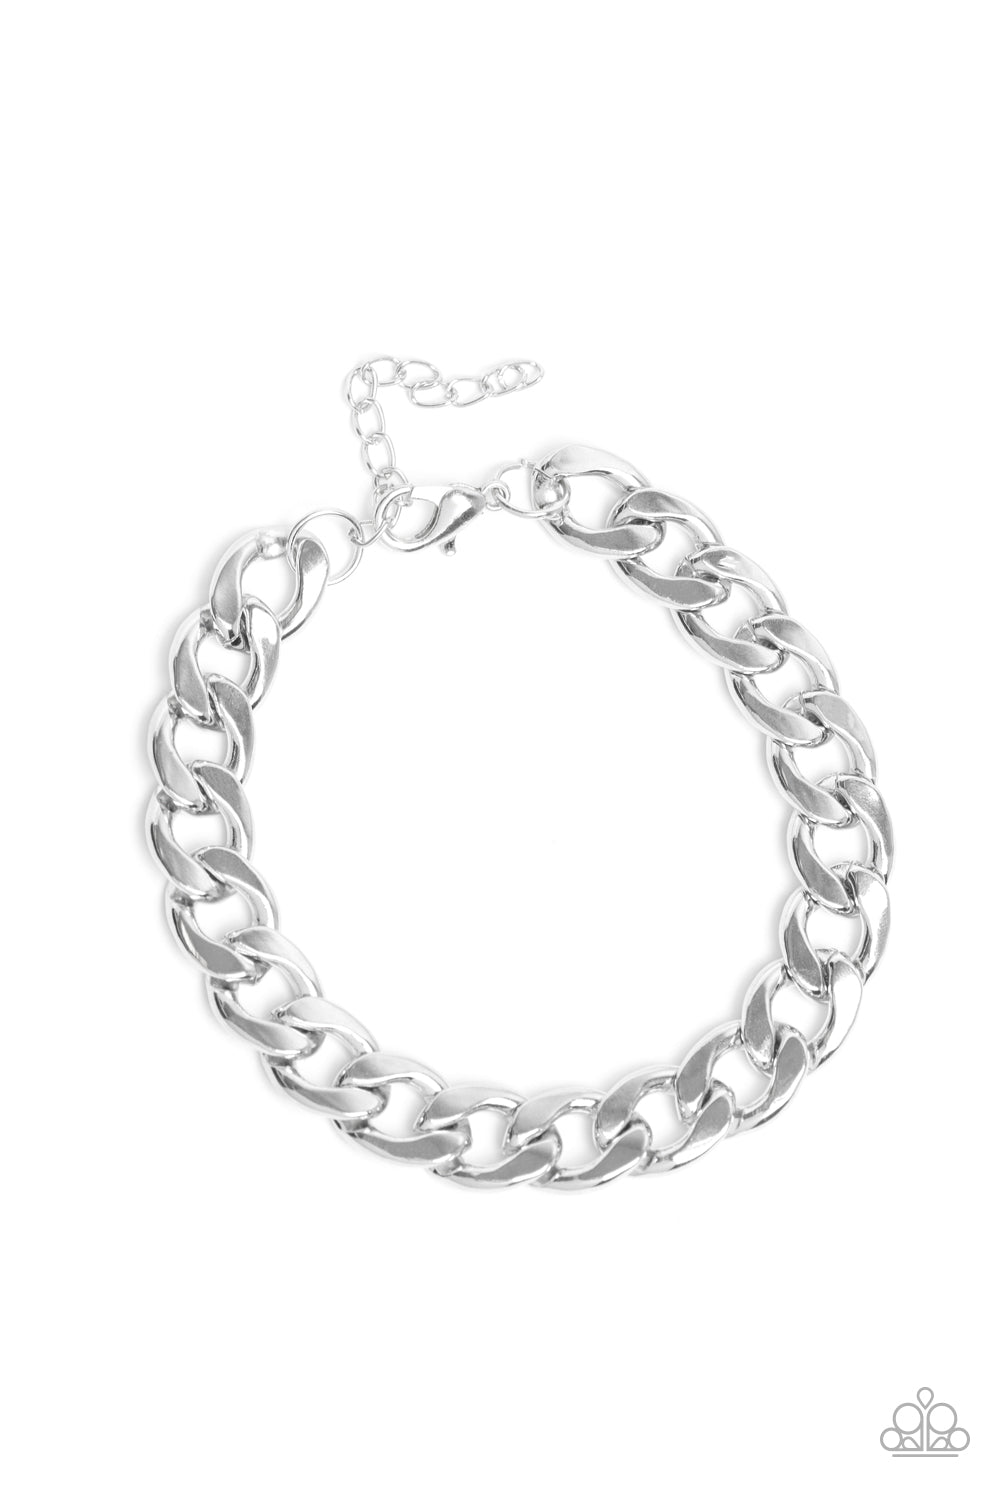 Leader Board Silver Urban Bracelet - Paparazzi Accessories. A thick strand of silver curb link chain is wrapped around the wrist for a classic look. Features an adjustable clasp closure.  All Paparazzi Accessories are lead free and nickel free!  Sold as one individual bracelet.